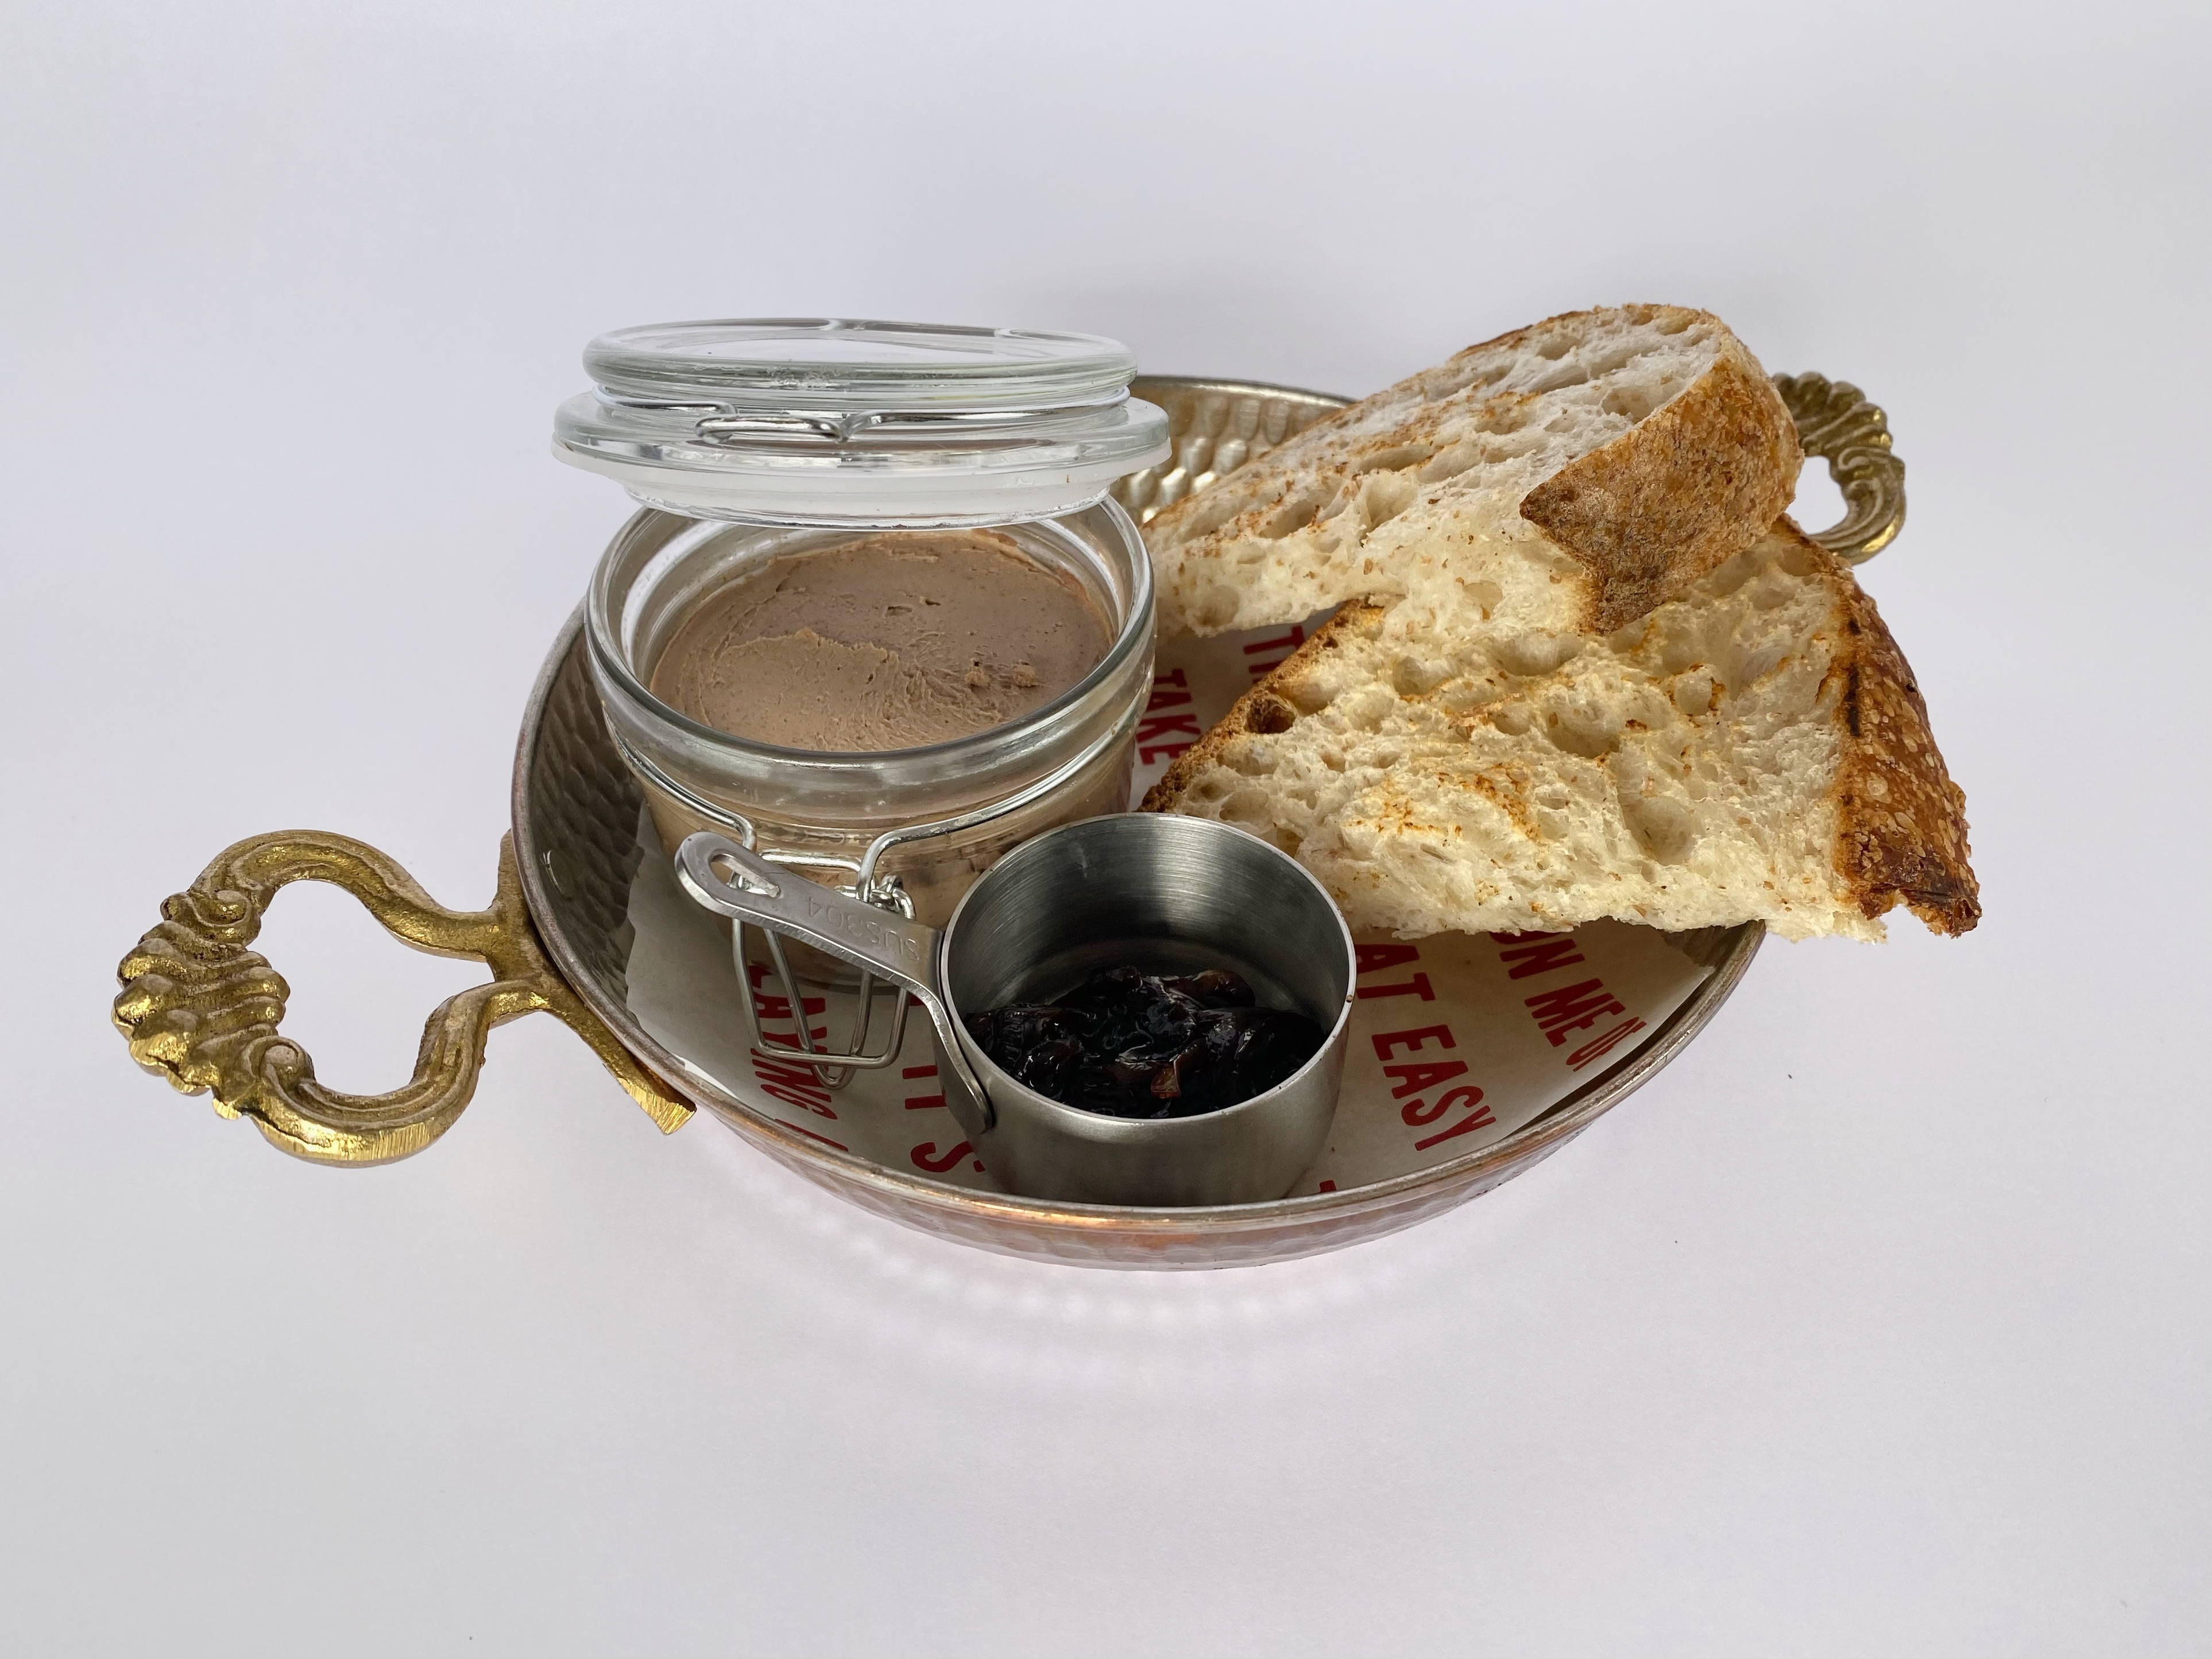 Chicken liver pate with onion jam and craft tartine bread